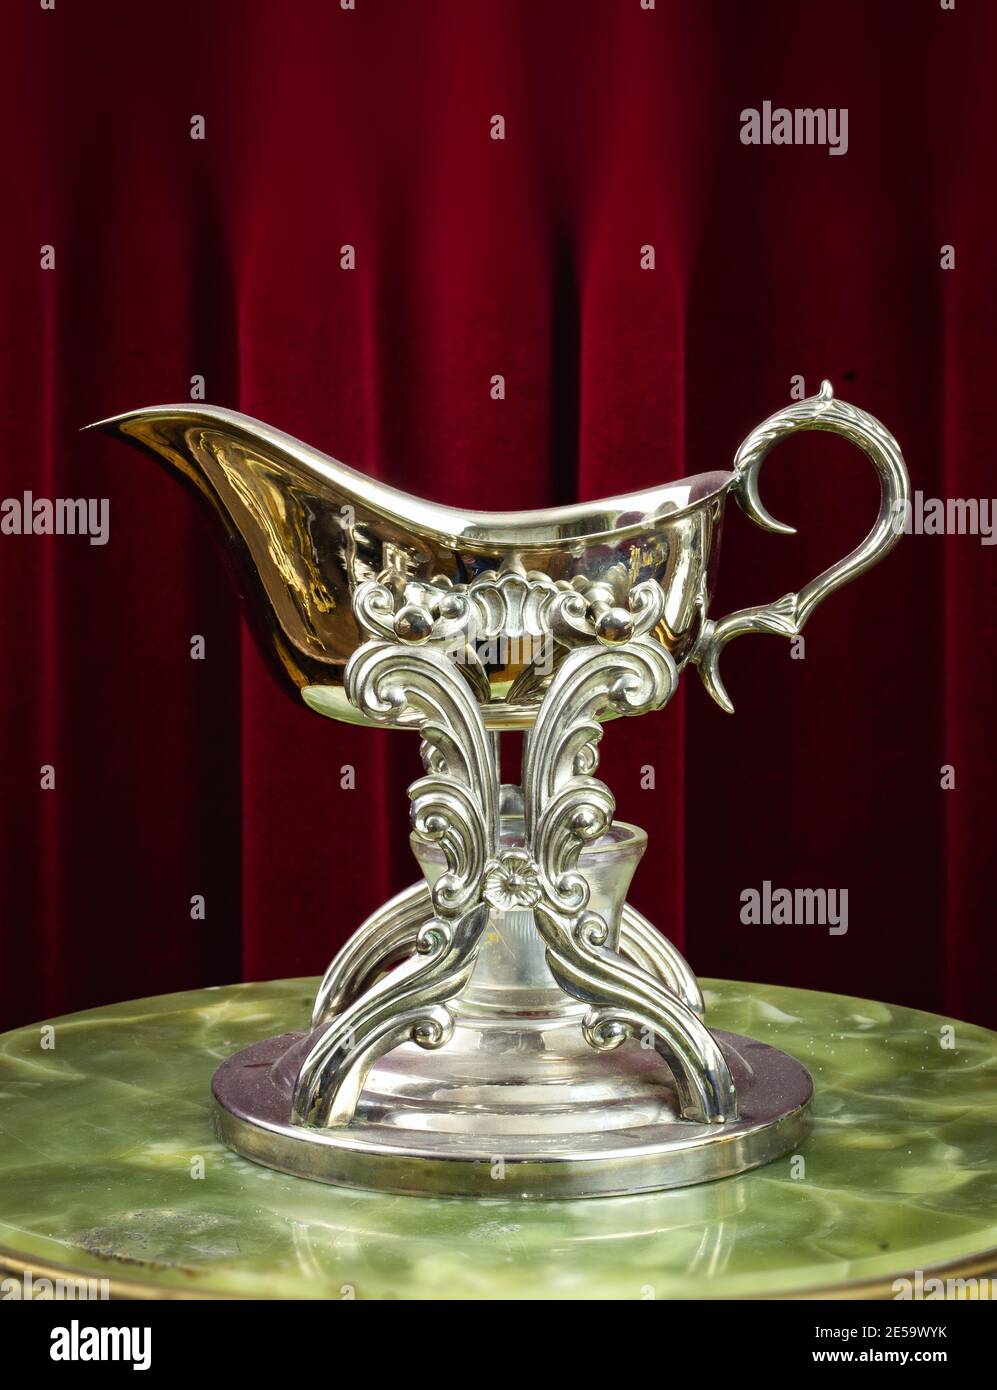 Sauciere, saucer - Ornate metal gravy boat, vintage old fashioned dish on a red background Stock Photo